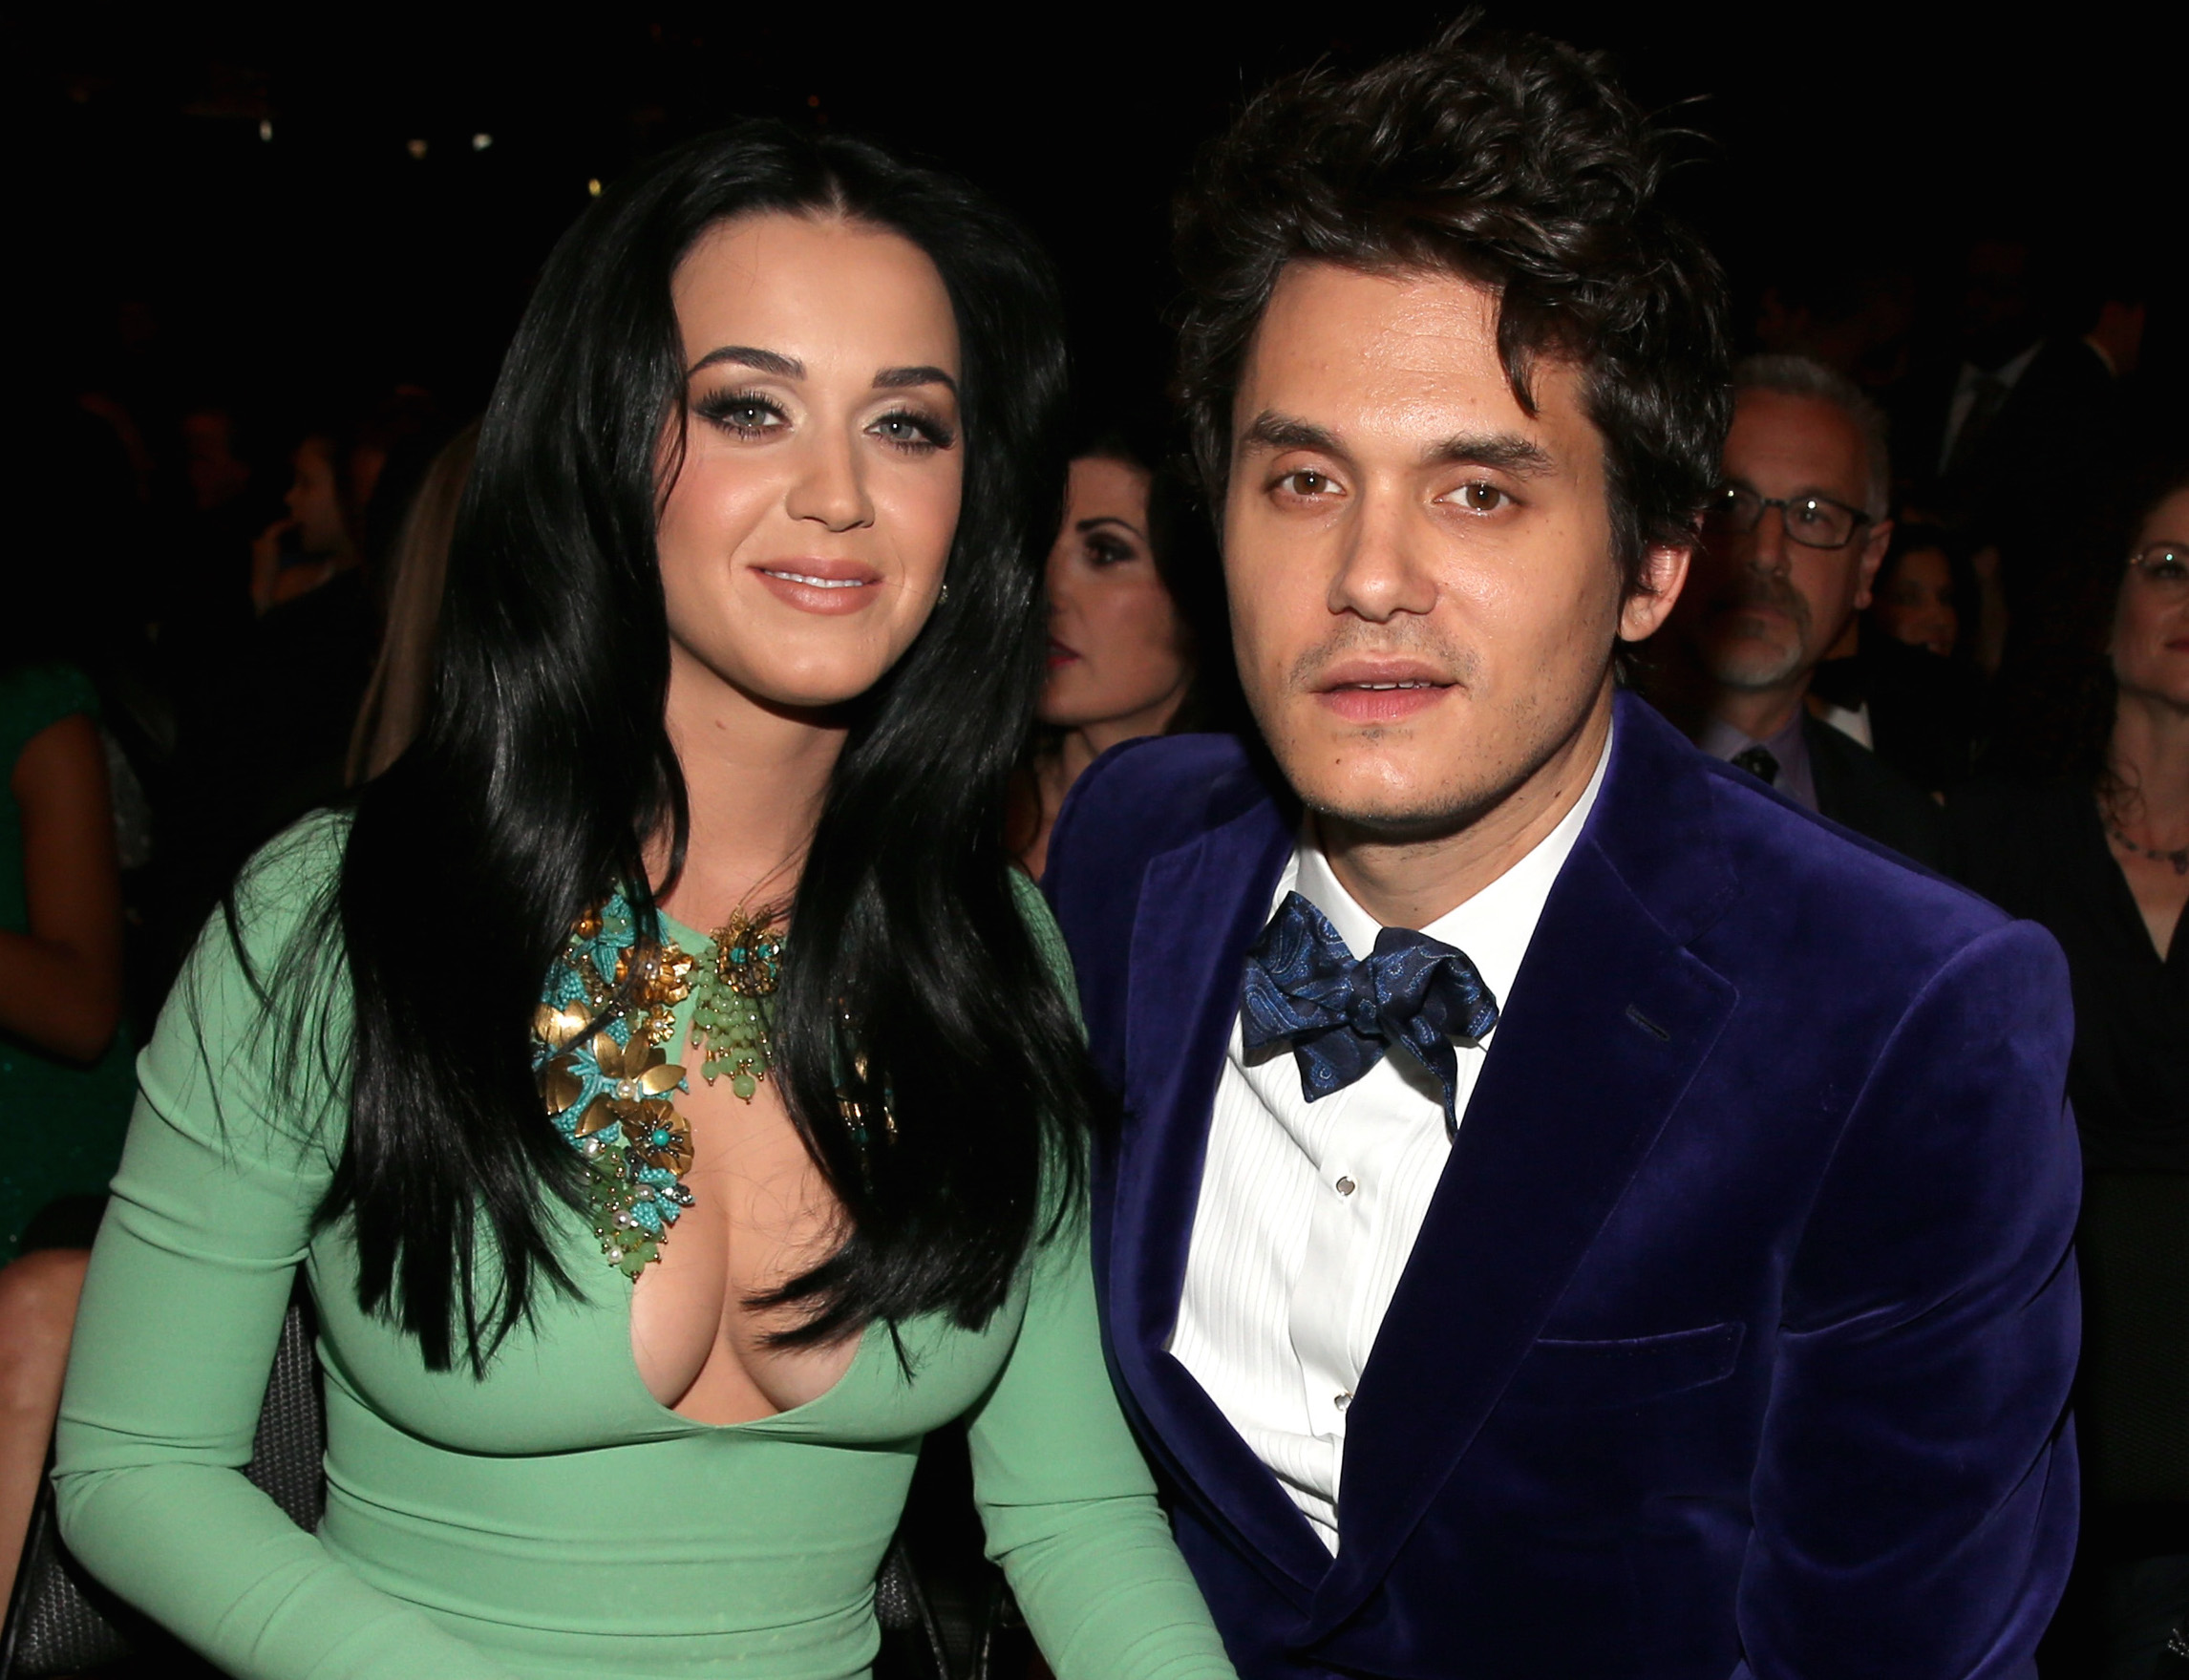 John Mayer's Dating History His Top 5 Famous Girlfriends